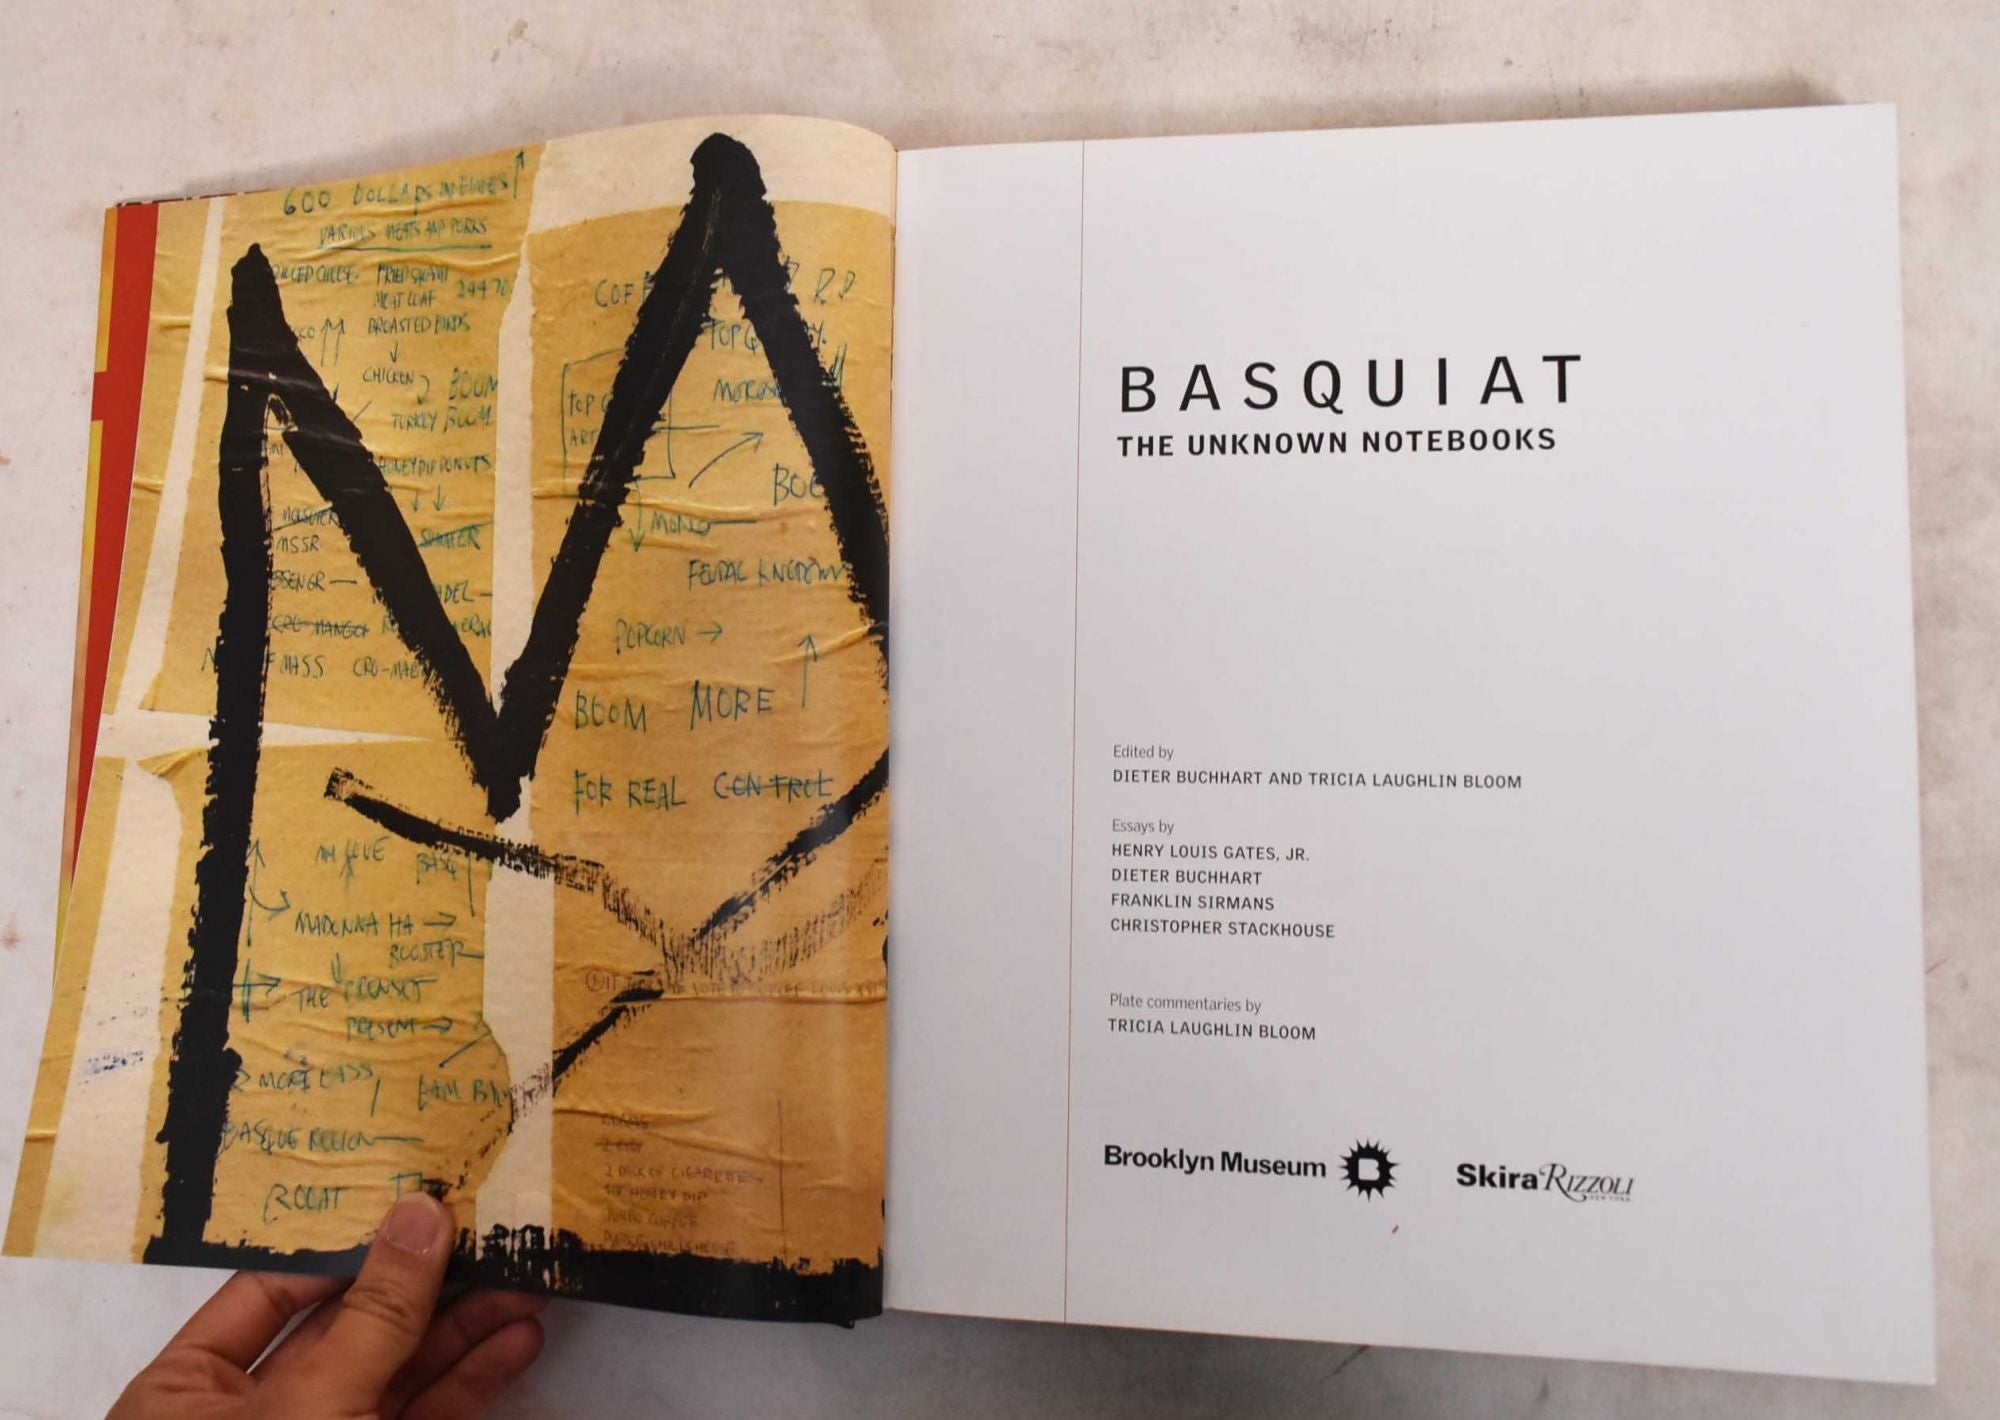 Basquiat: The Unknown Notebooks by Dieter Buchhart, Tricia Laughlin Bloom  on Mullen Books